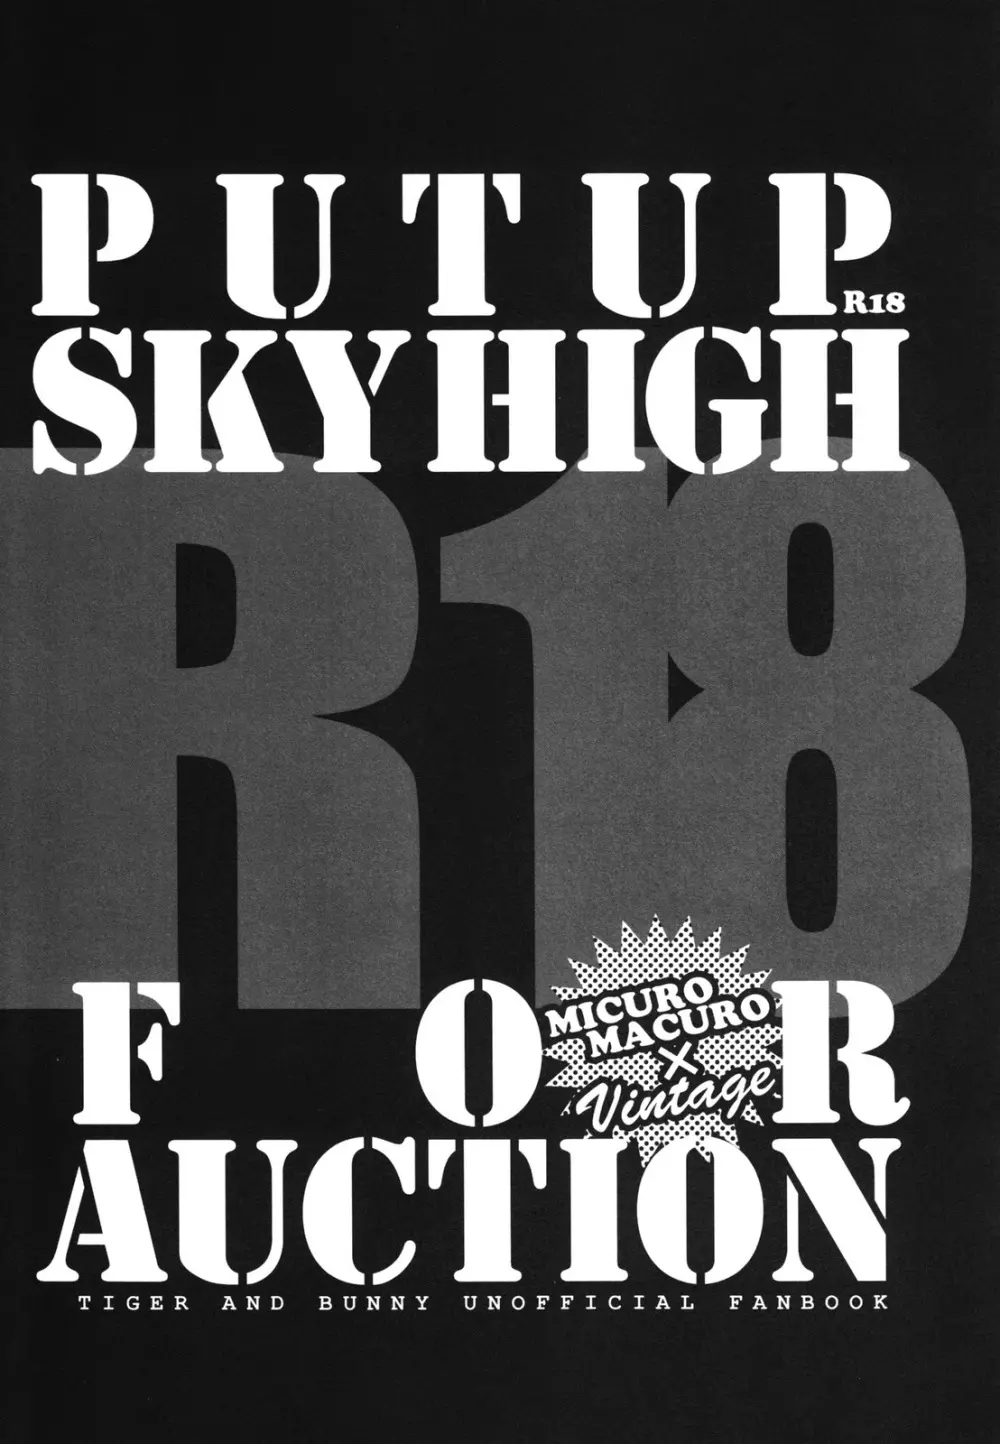 PUT UP SKYHIGH FOR AUCTION Page.2